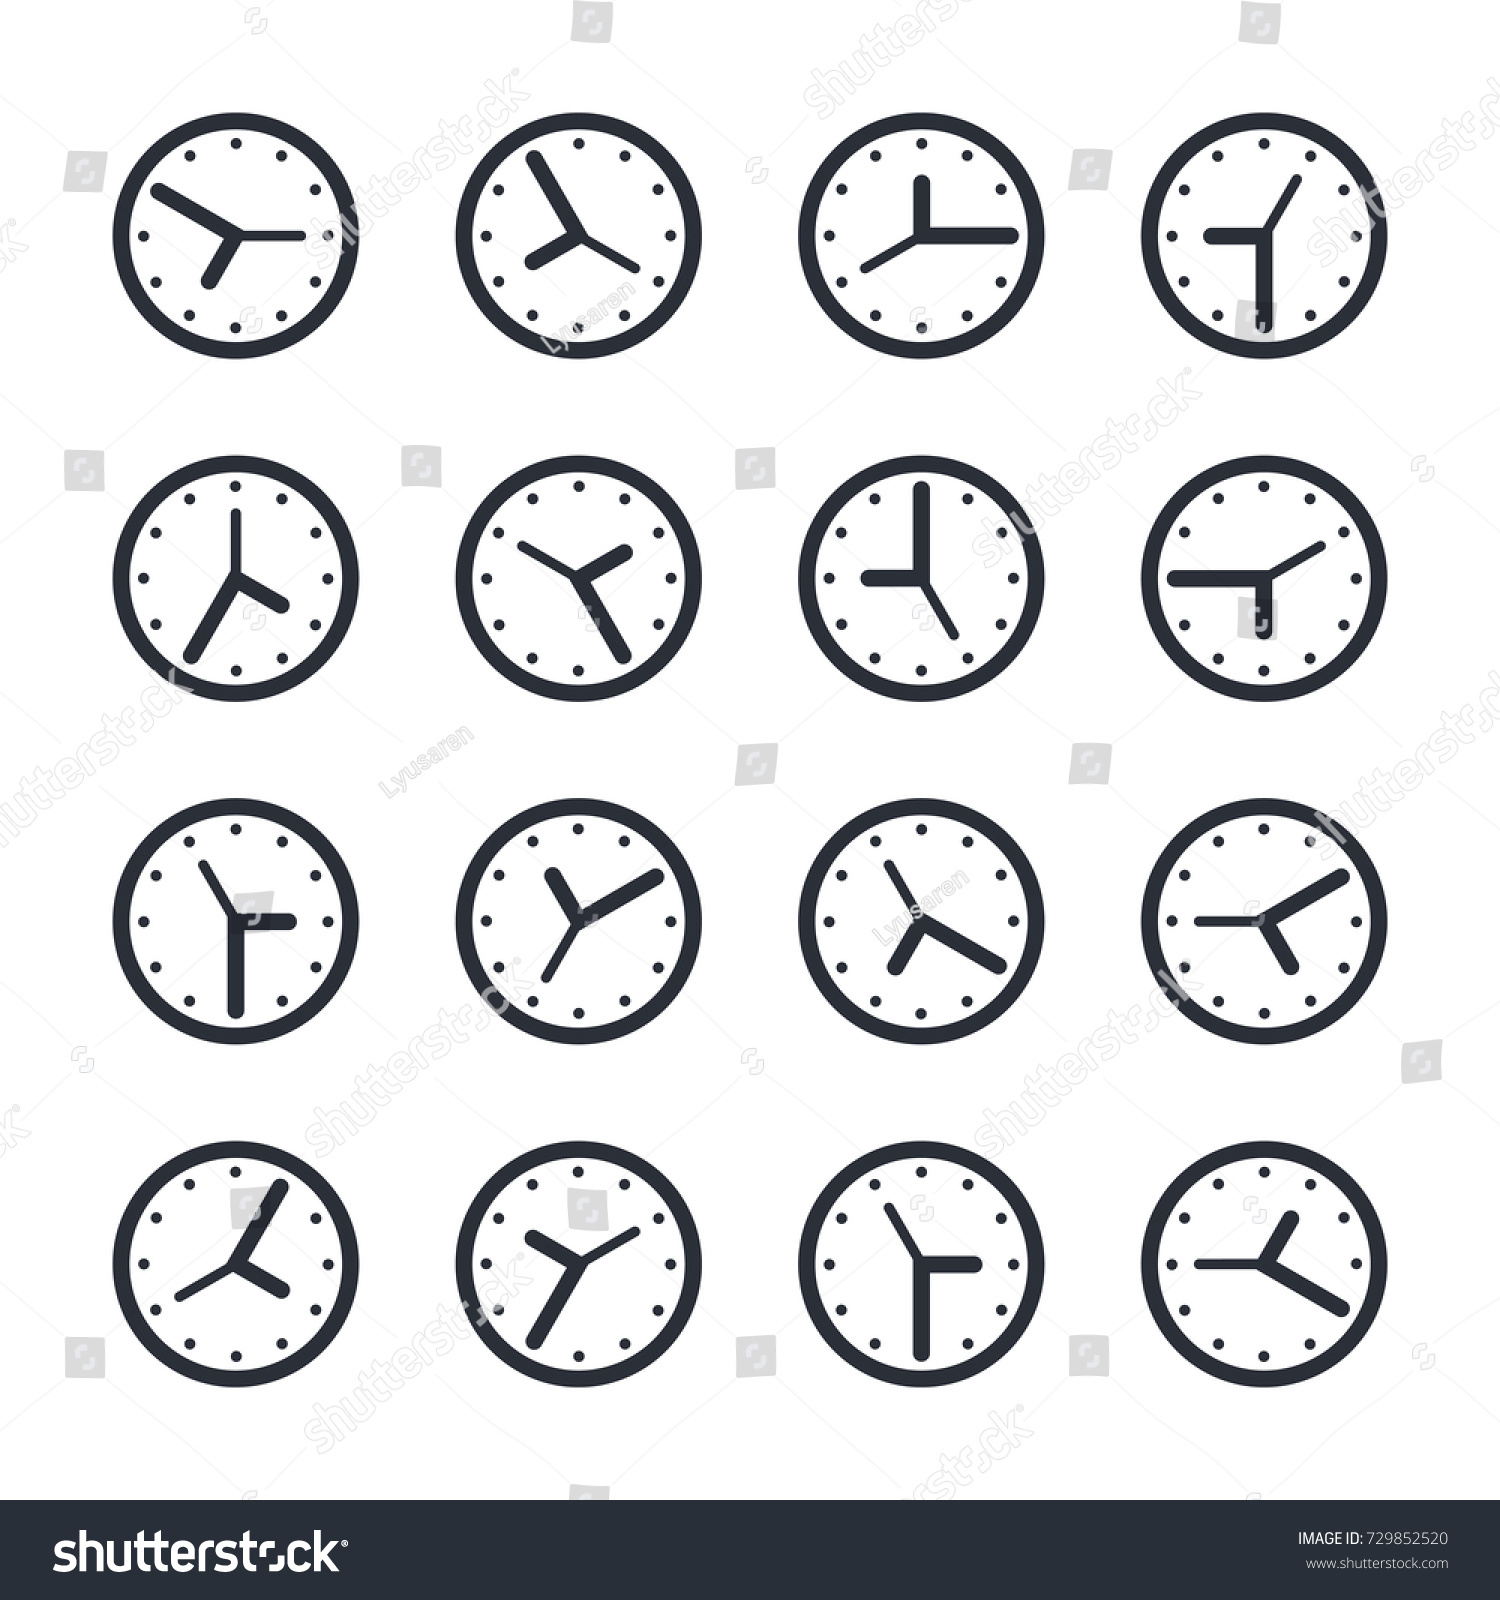 Outline Illustration 16 Clocks Vector Icons Stock Vector (Royalty Free ...